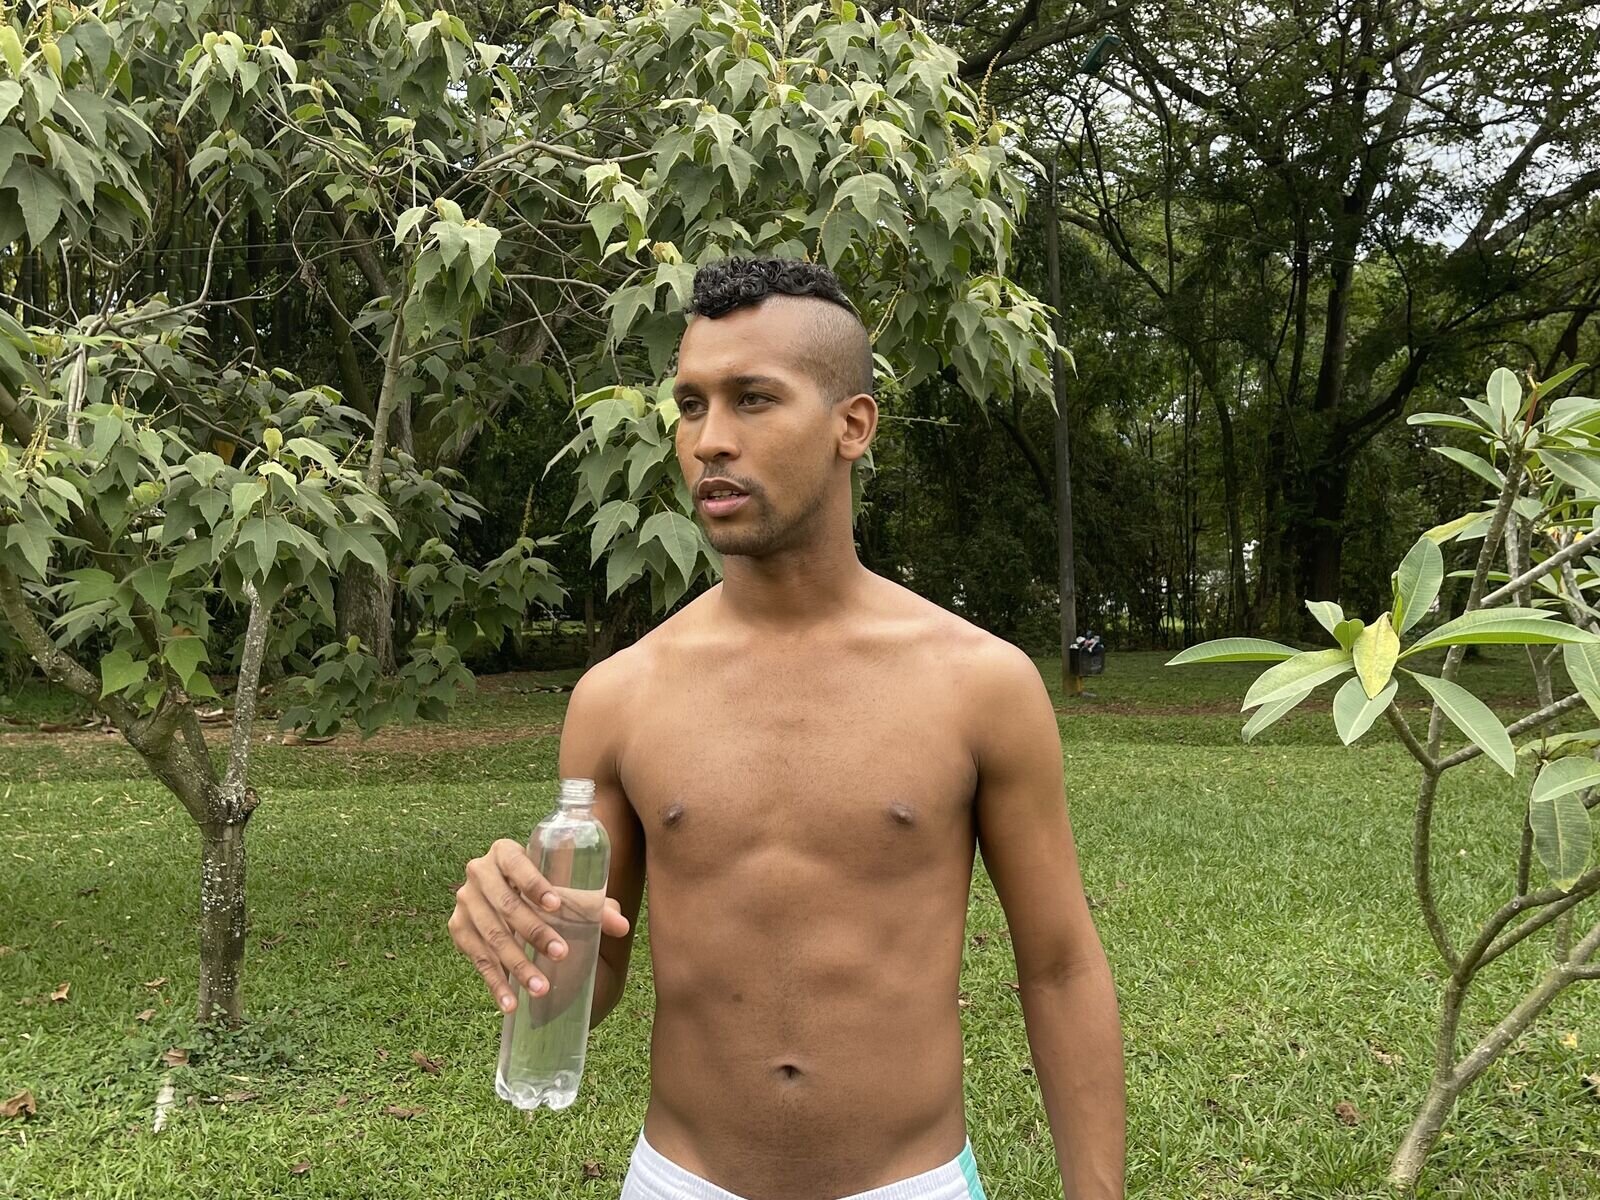 Free Live Sex Chat With MatiasSanto